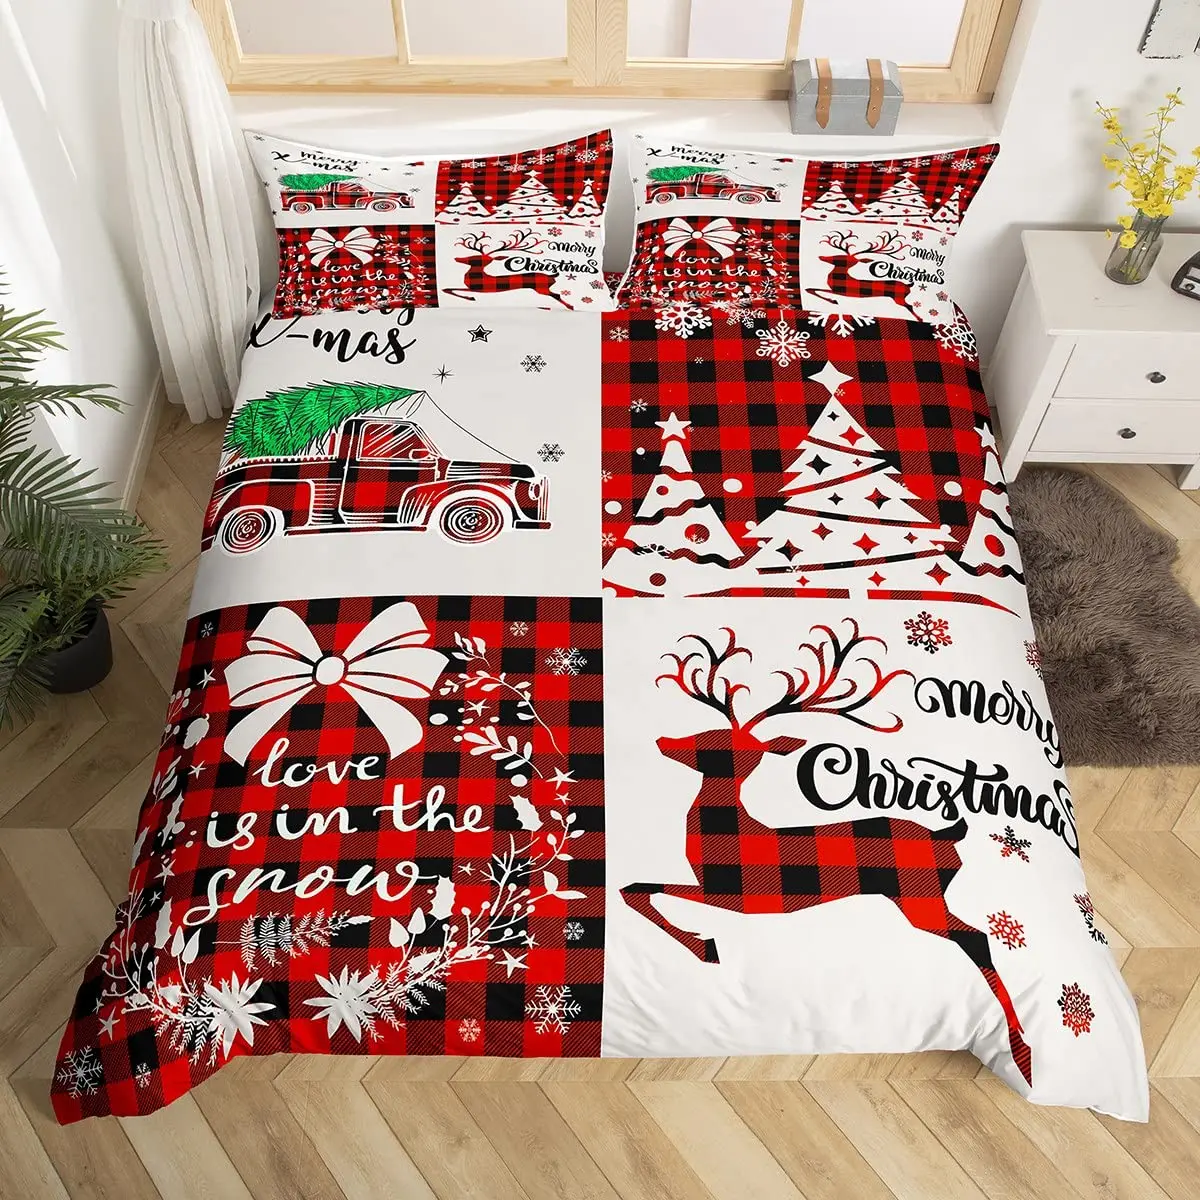 

Merry Christmas Duvet Cover Set,Red Buffalo Checked Rustic Truck Comforter Cover,Plaid Xmas Tree Elk Deer Snowflake Bedding Sets